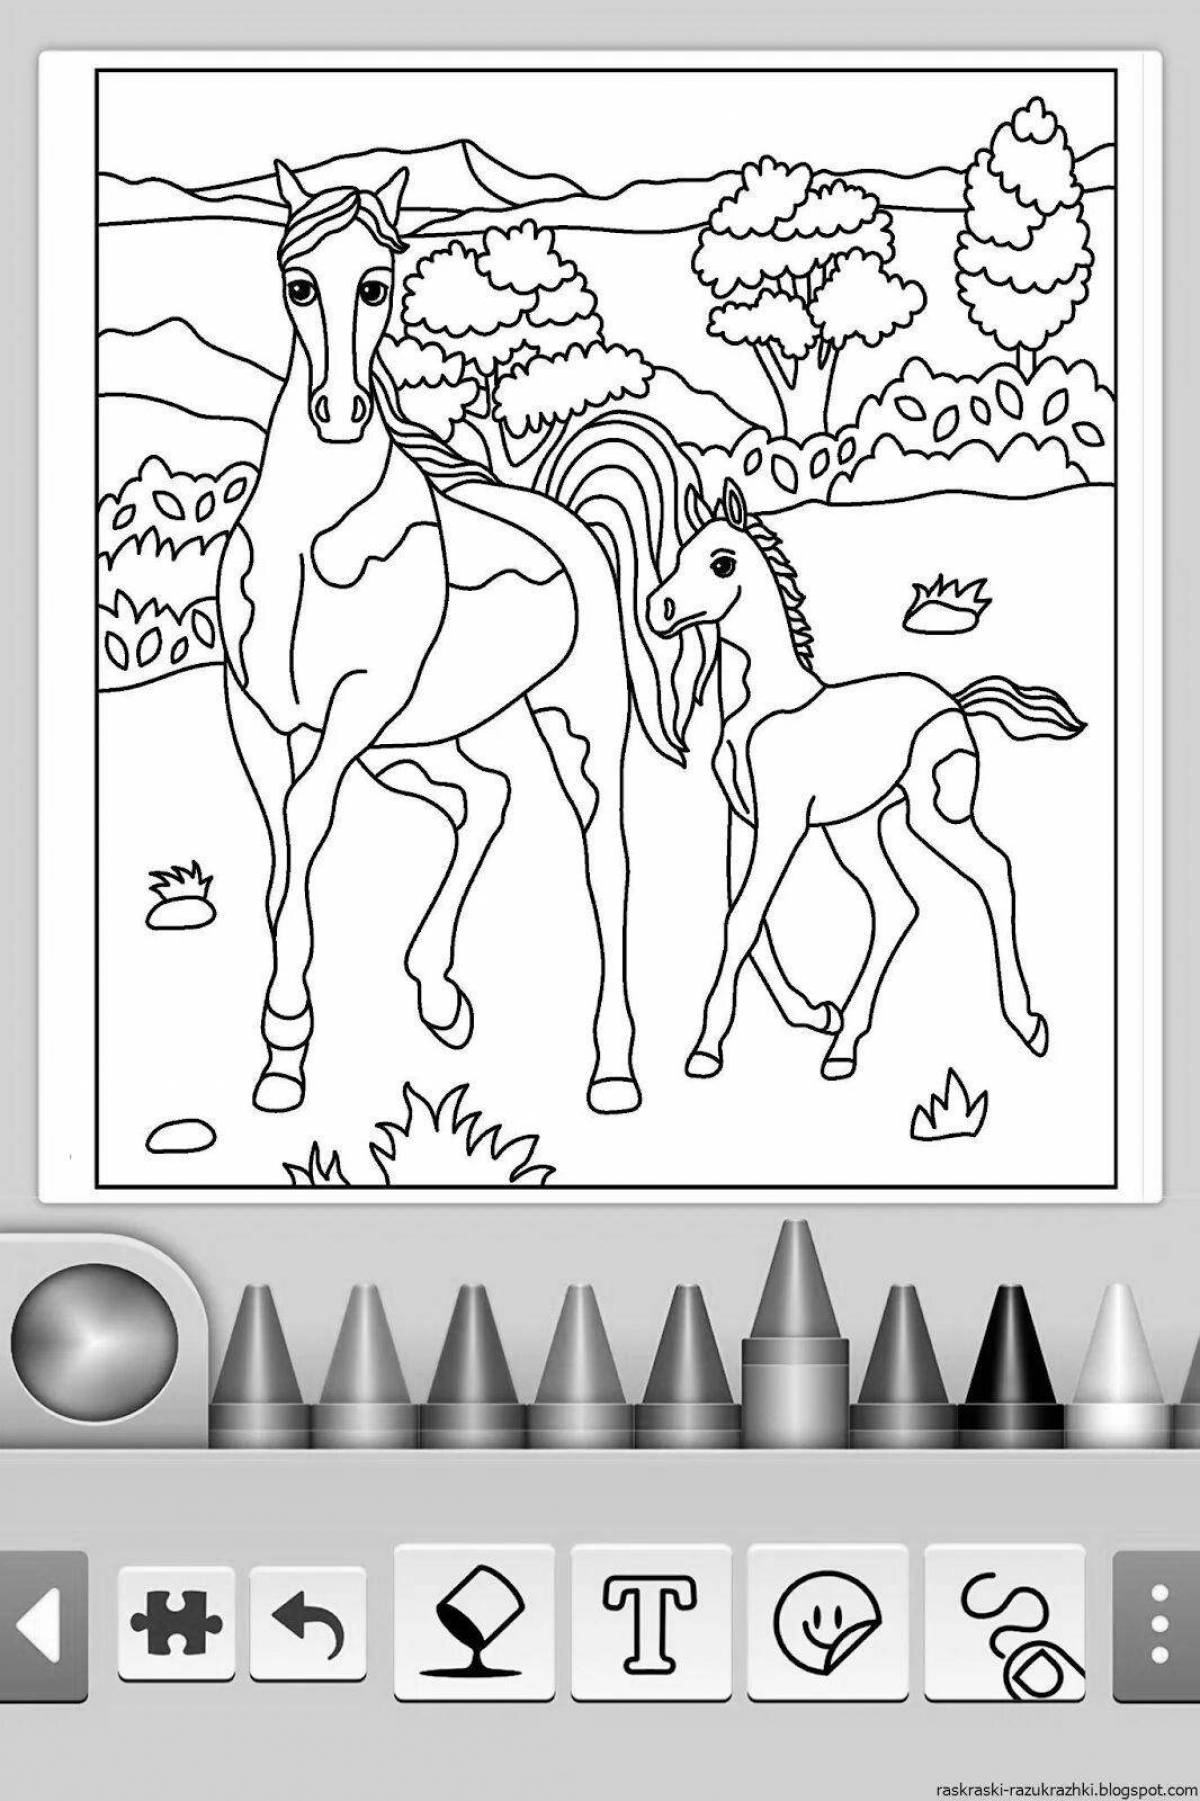 Coloring game for girls 6-7 years old